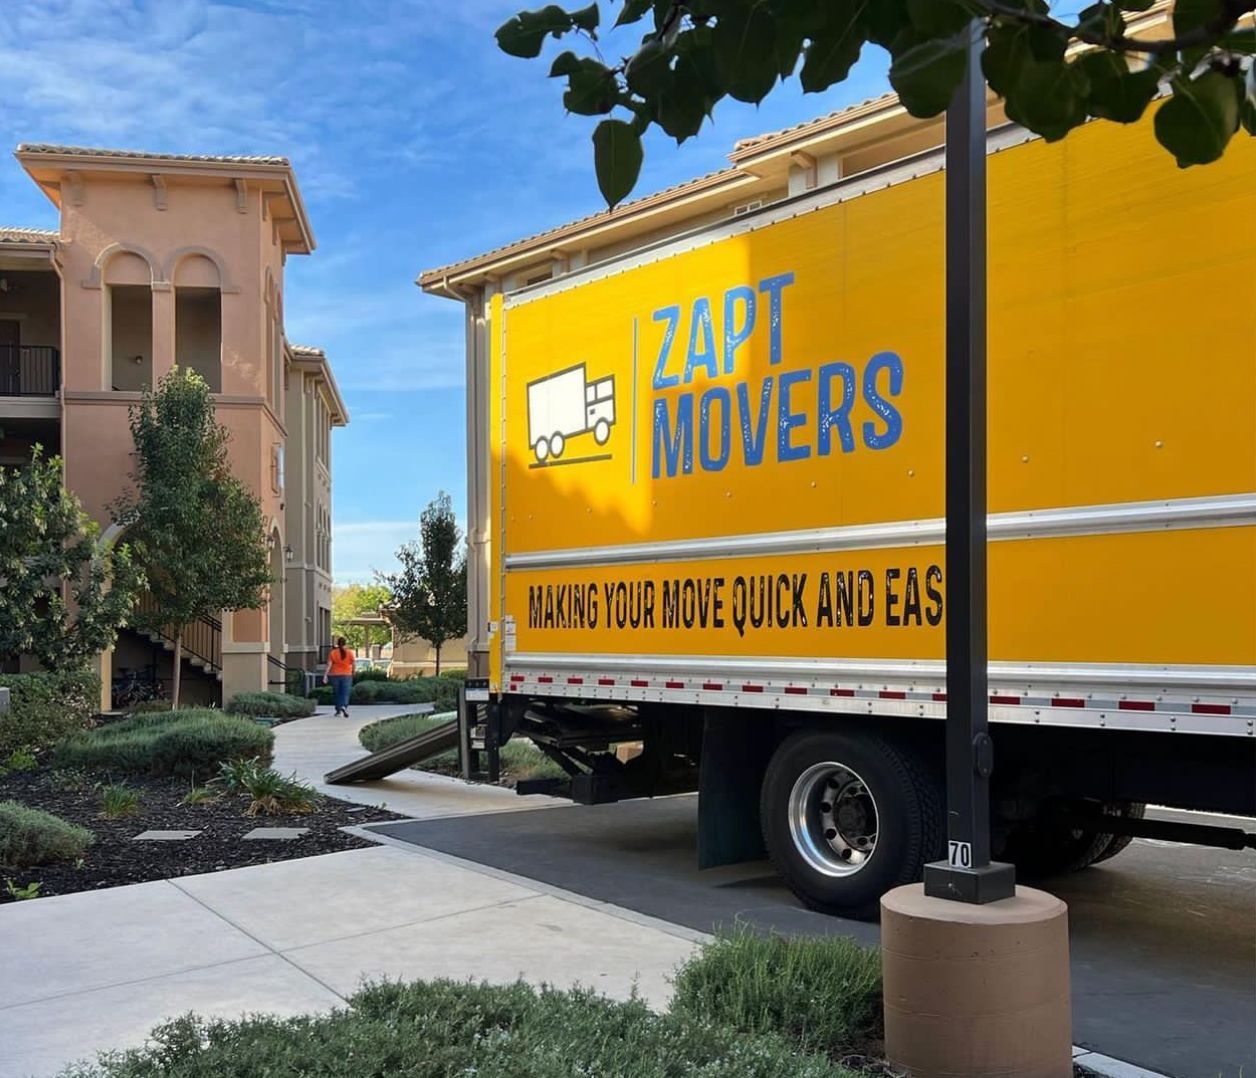 A yellow z4pt movers truck is parked in front of a building